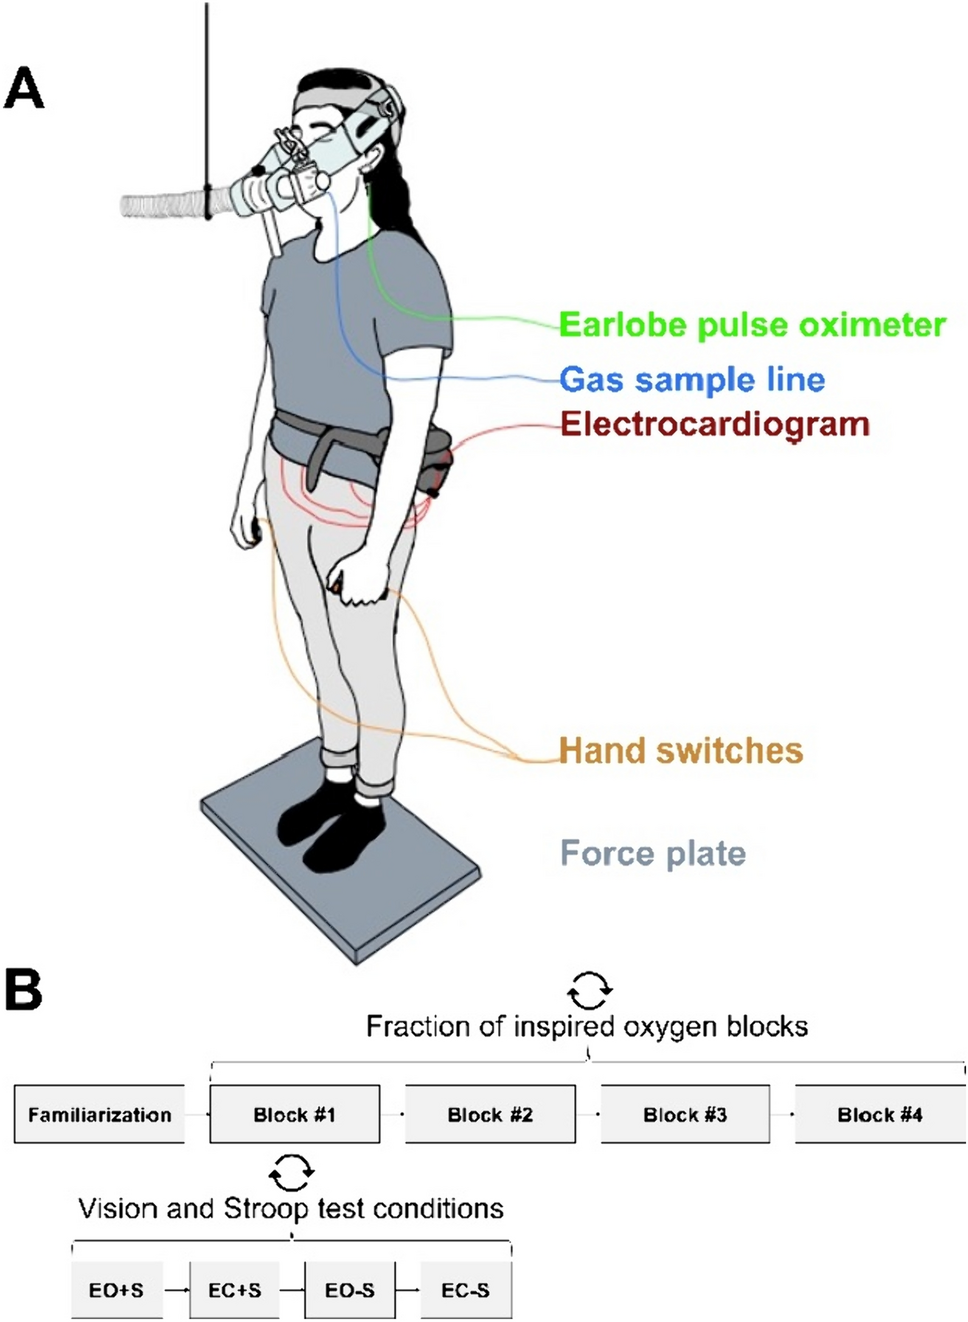 The effects of acute normobaric hypoxia on standing balance while dual-tasking with and without visual input